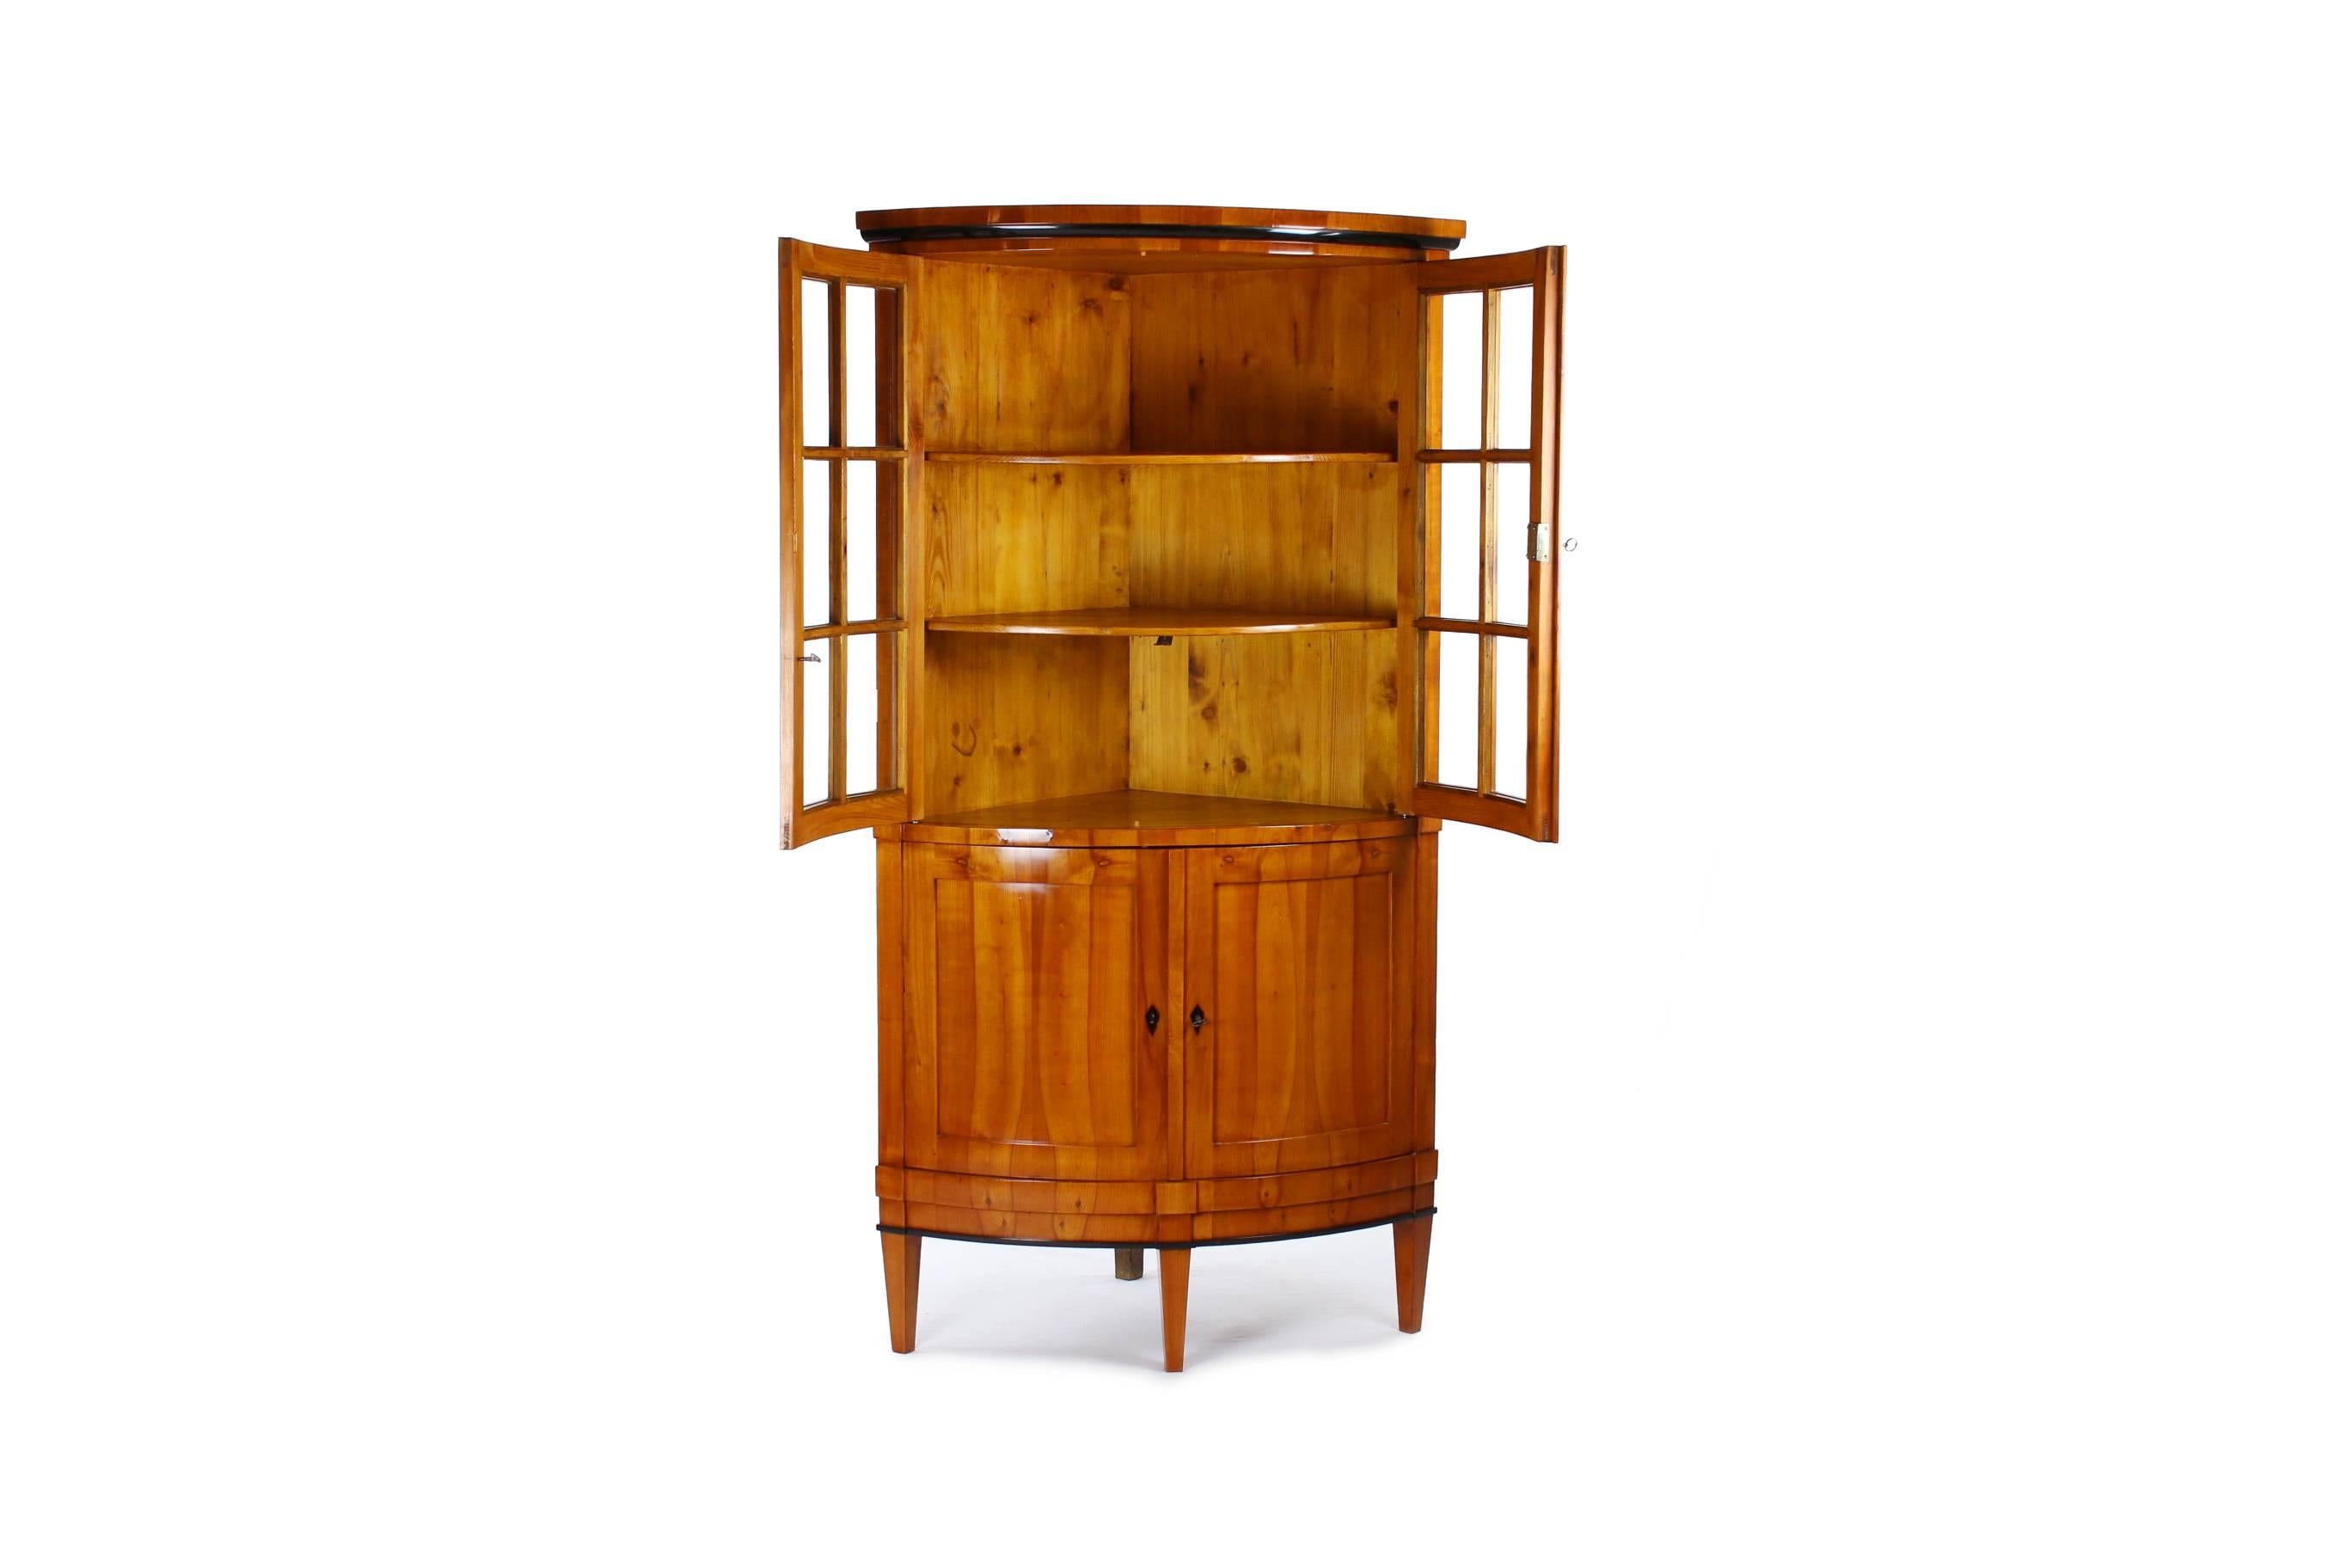 Biedermeier period corner cupboard,
circa 1830-1840.
Cherrywood veneered.
Parts ebonized.
Top front-glazed two-door.
Two-door drag with cuddy.
Restored residential-ready state.
Shellac polish.

I dispatch by air in safe wood boxes only. So